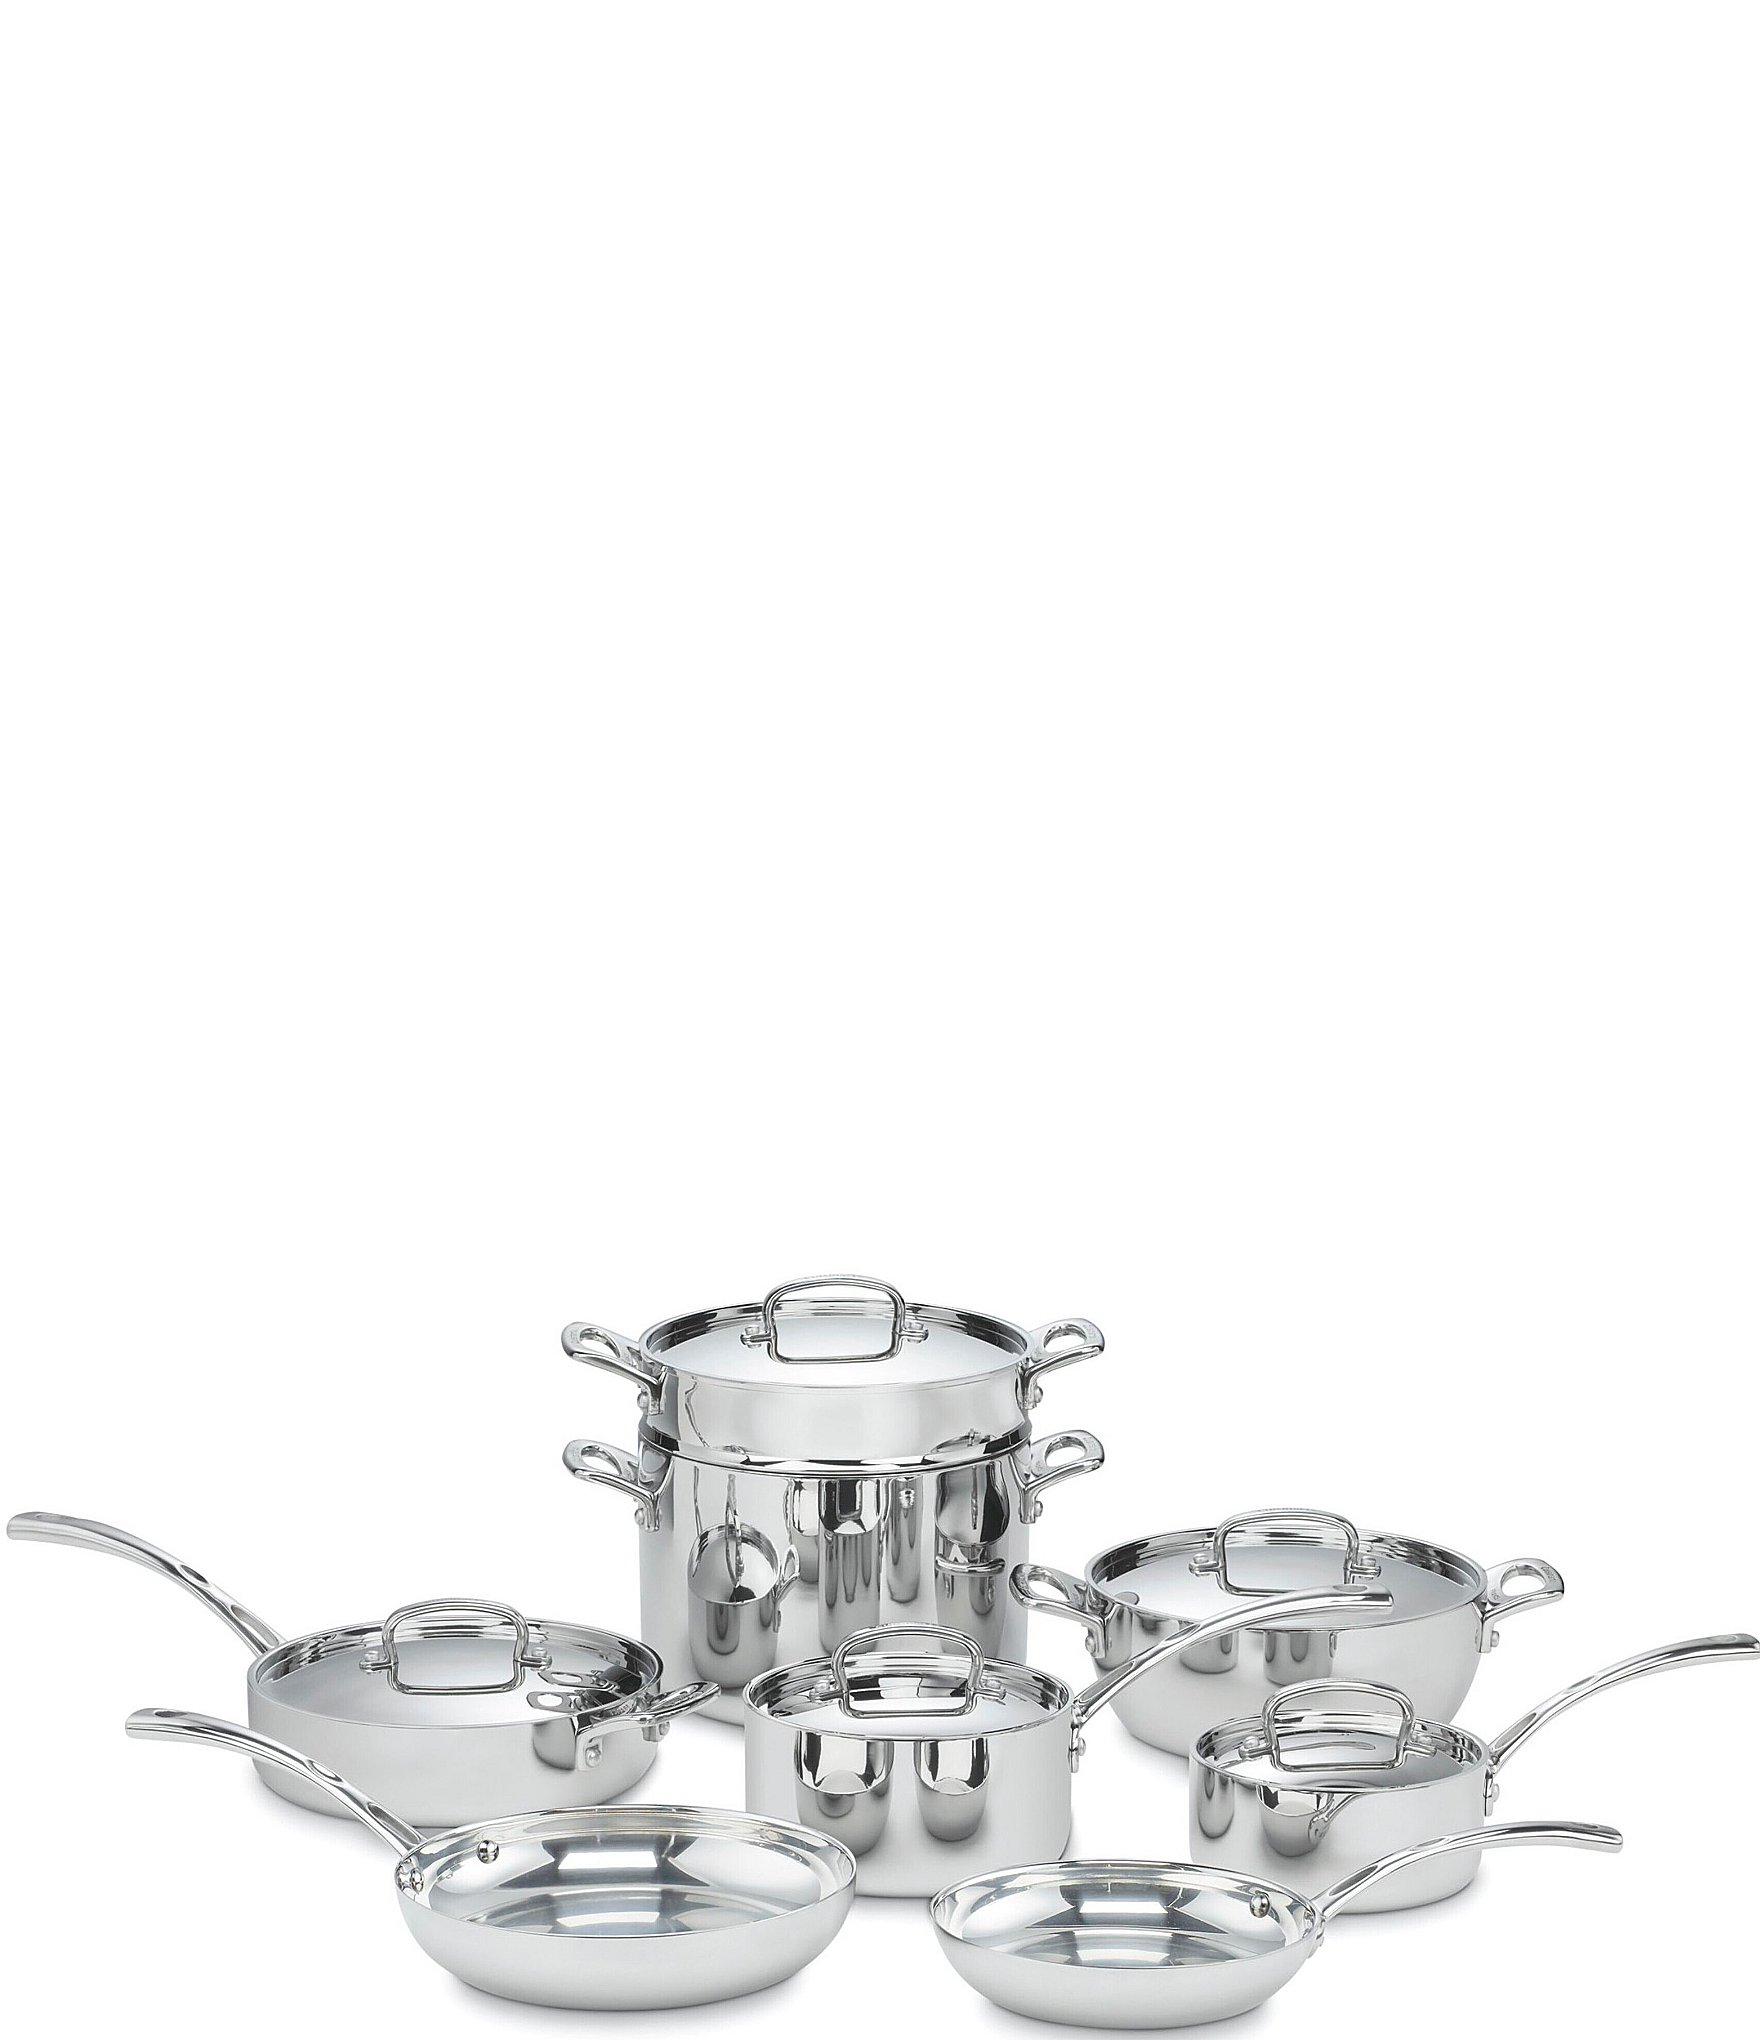 https://dimg.dillards.com/is/image/DillardsZoom/zoom/cuisinart-french-classic-stainless-13-piece-cookware-set/20084901_zi.jpg